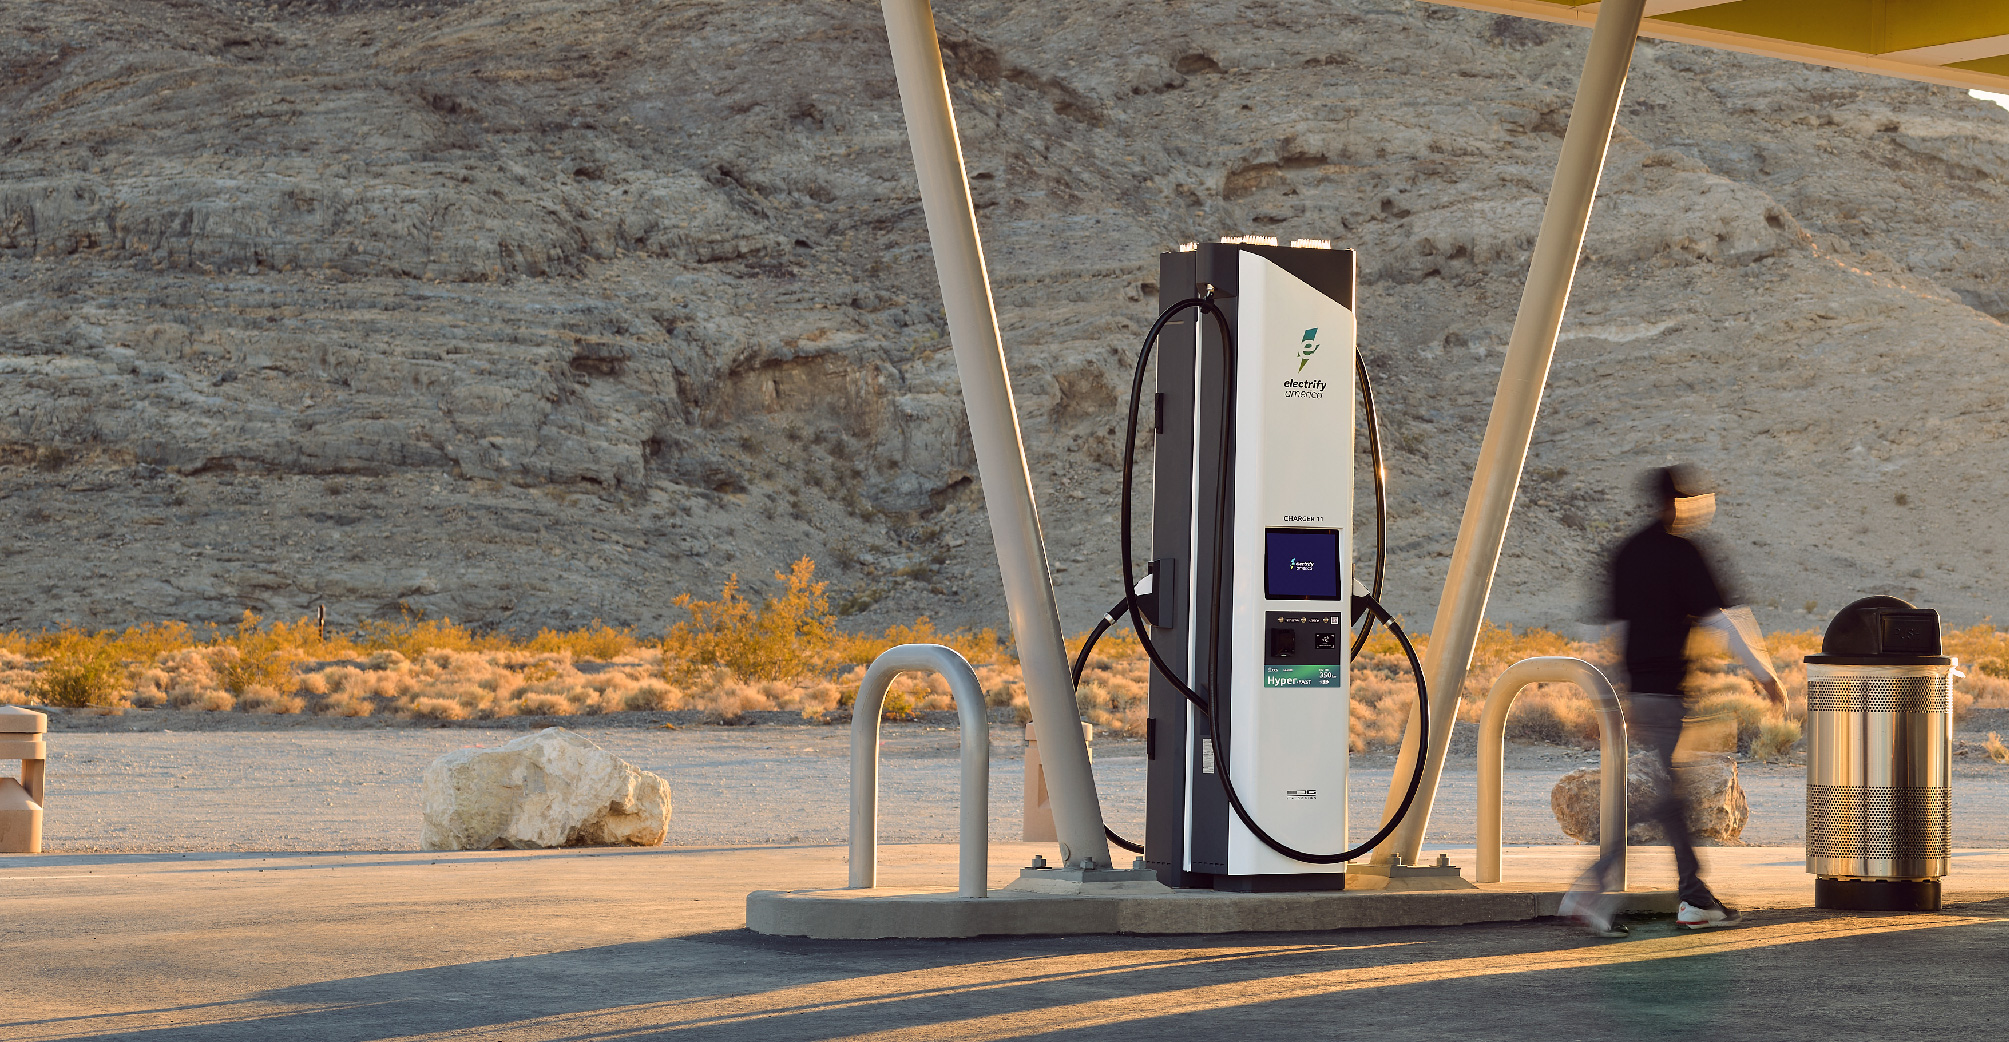 This image displays an Electrify America charging station in the desert